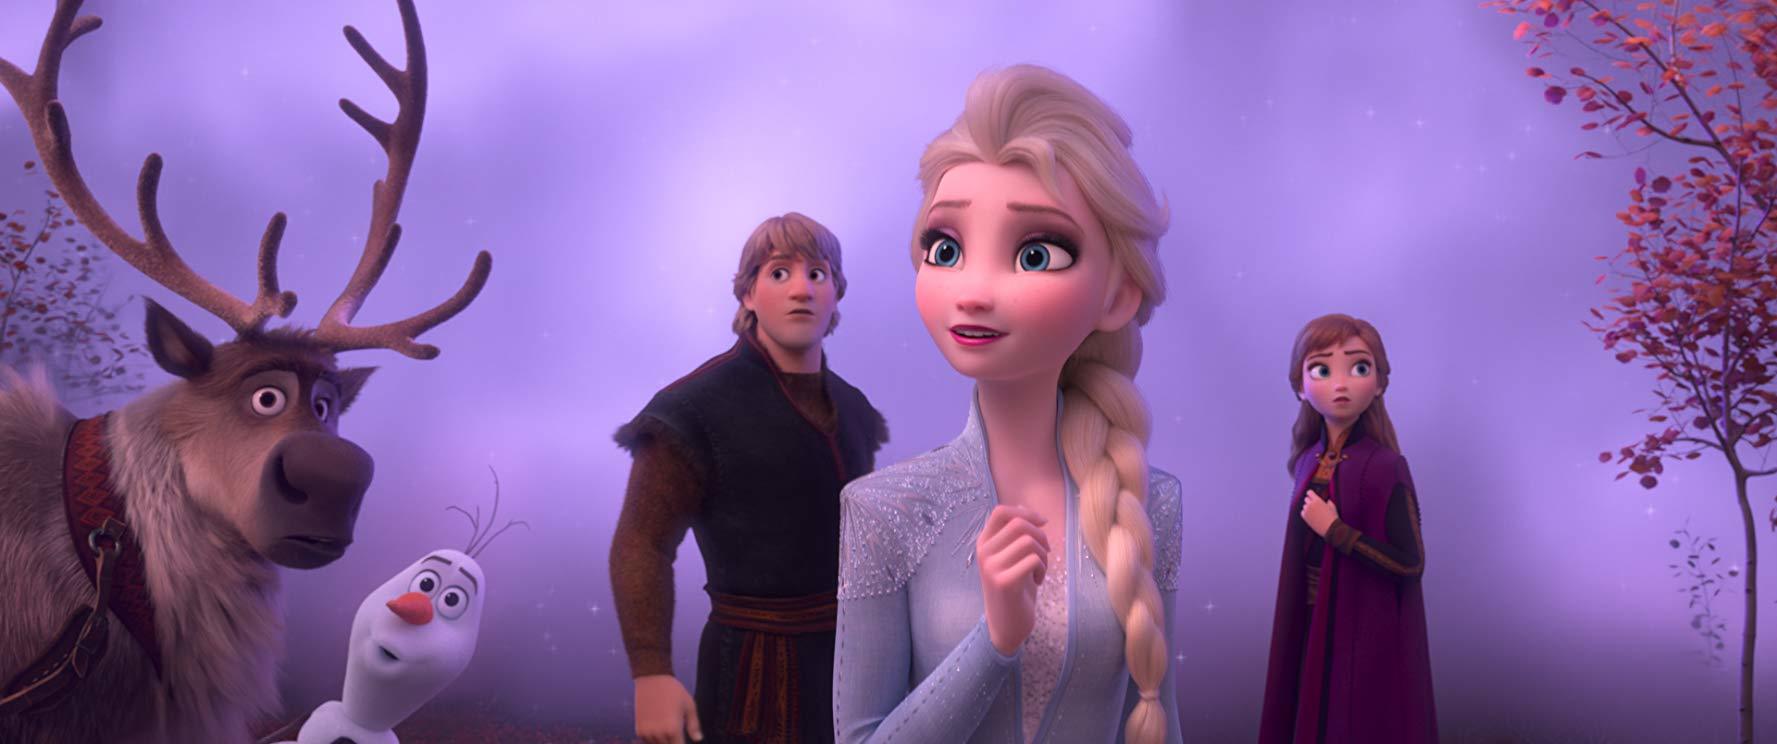 Wave of sequels at Disney: Frozen 3 and Toy Story 5 are confirmed